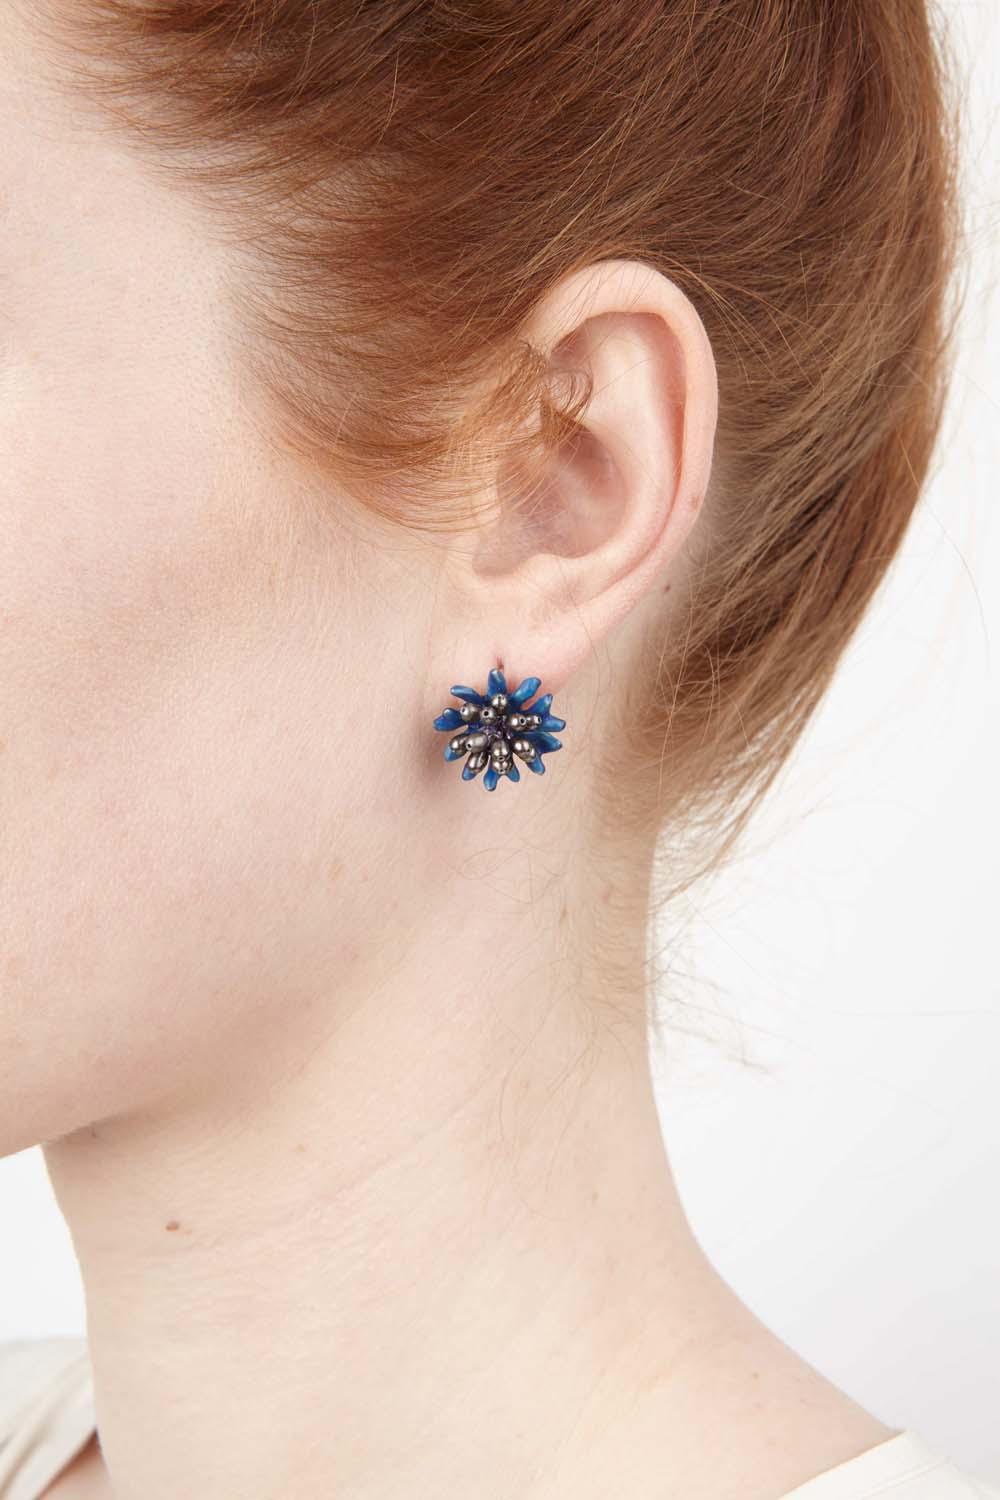 The Blue Cornflower earrings are cast in bronze with blue enamel and peacock freshwater pearls.